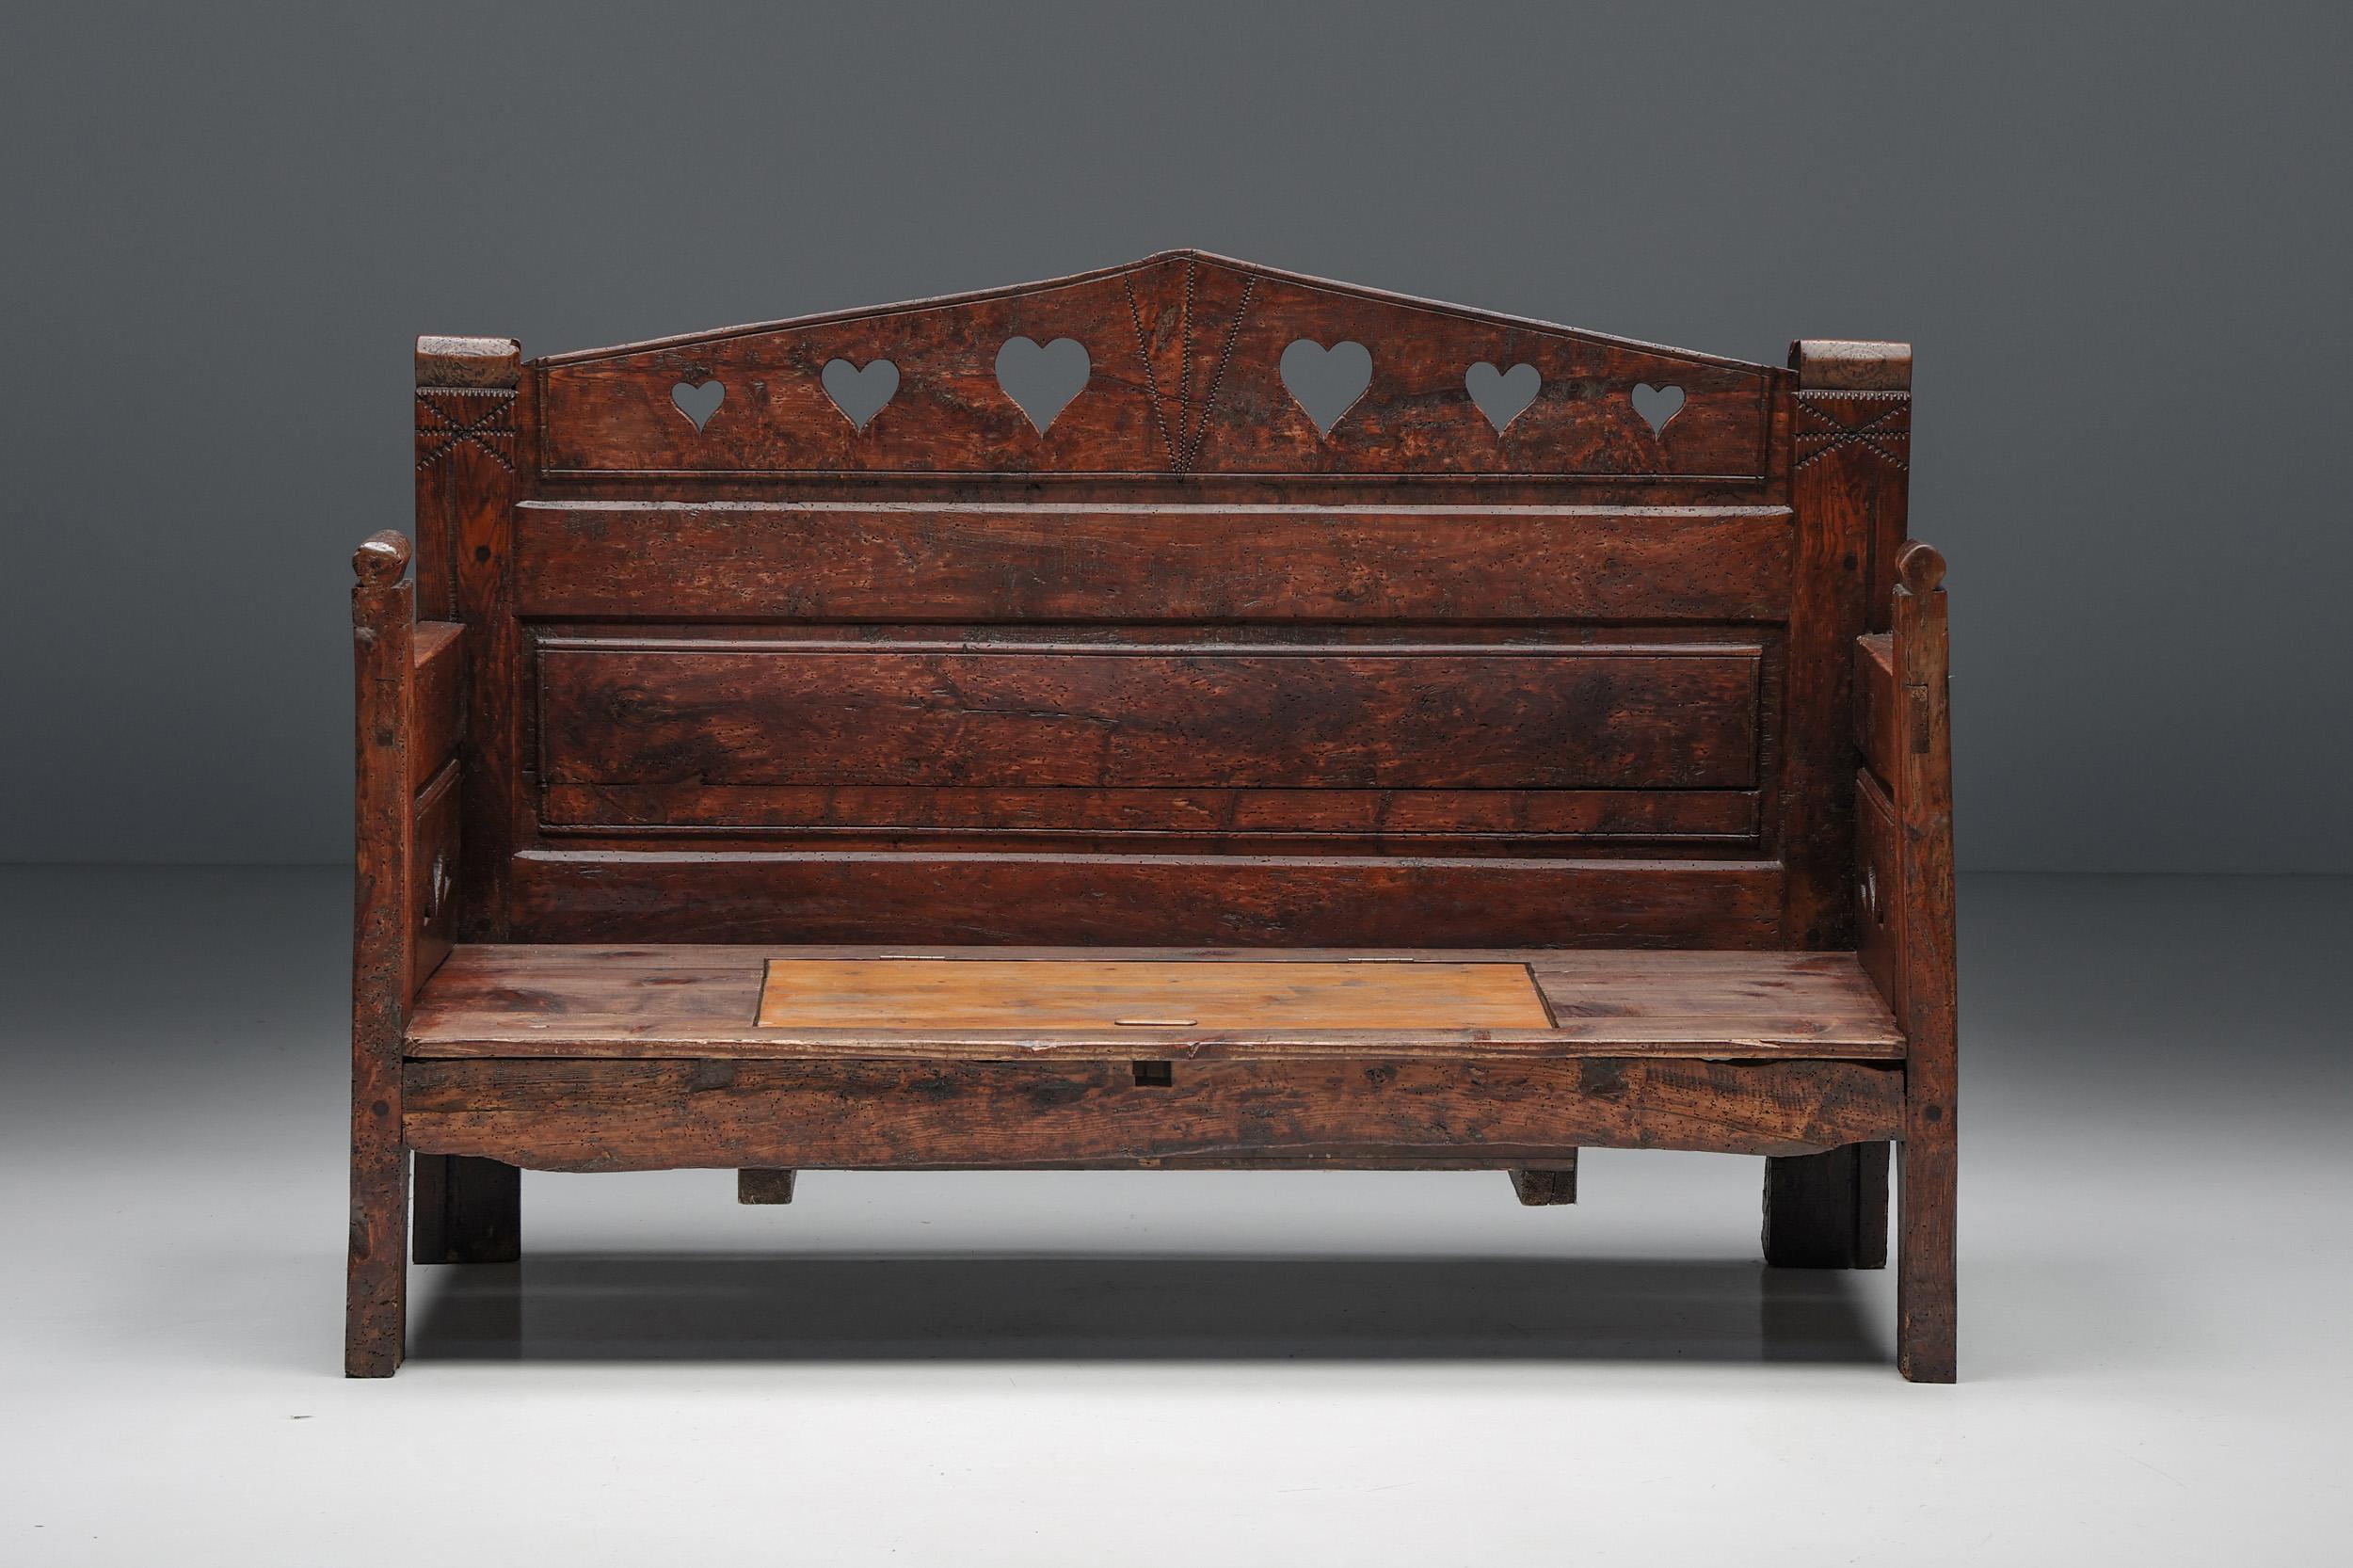 Rustic Carved Bench in Solid Wood with Storing Space, France, 19th Century For Sale